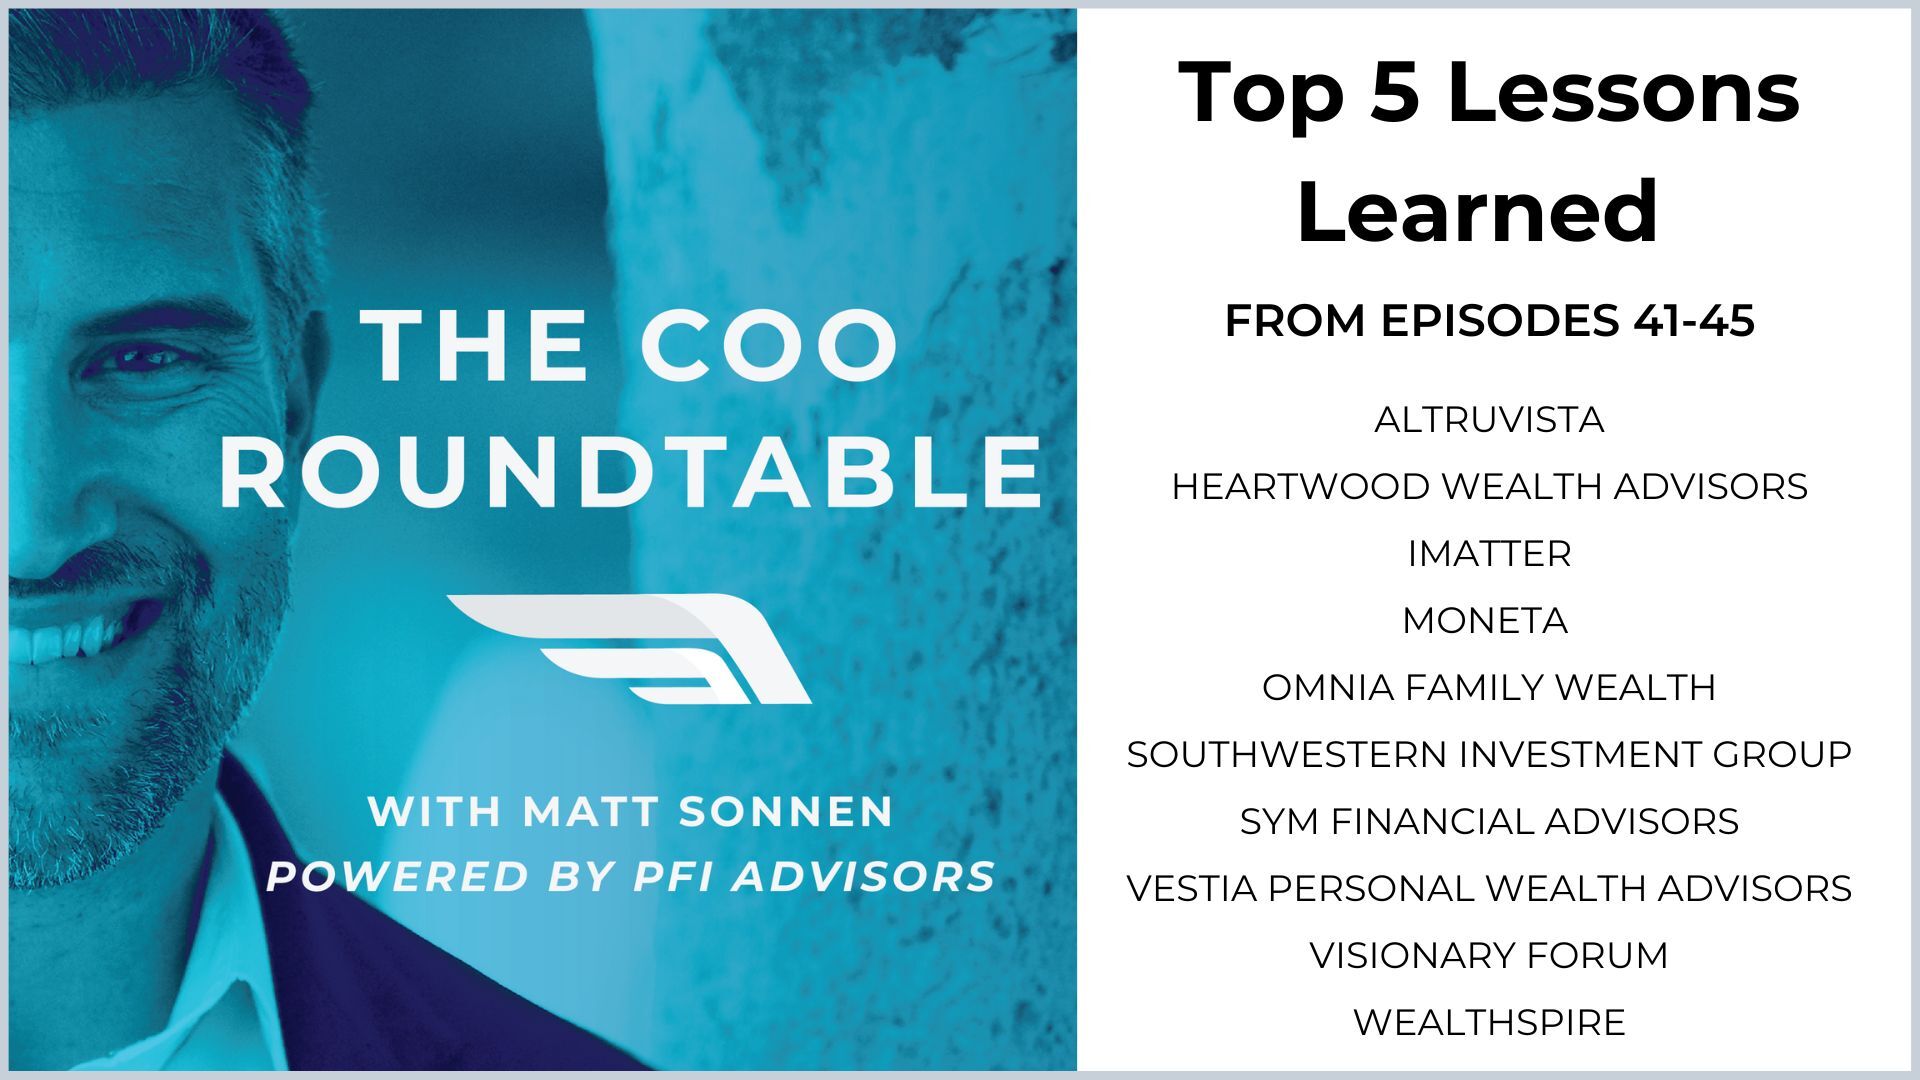 Top 5 Lessons Learned from Episodes  41-45 of The COO Roundtable